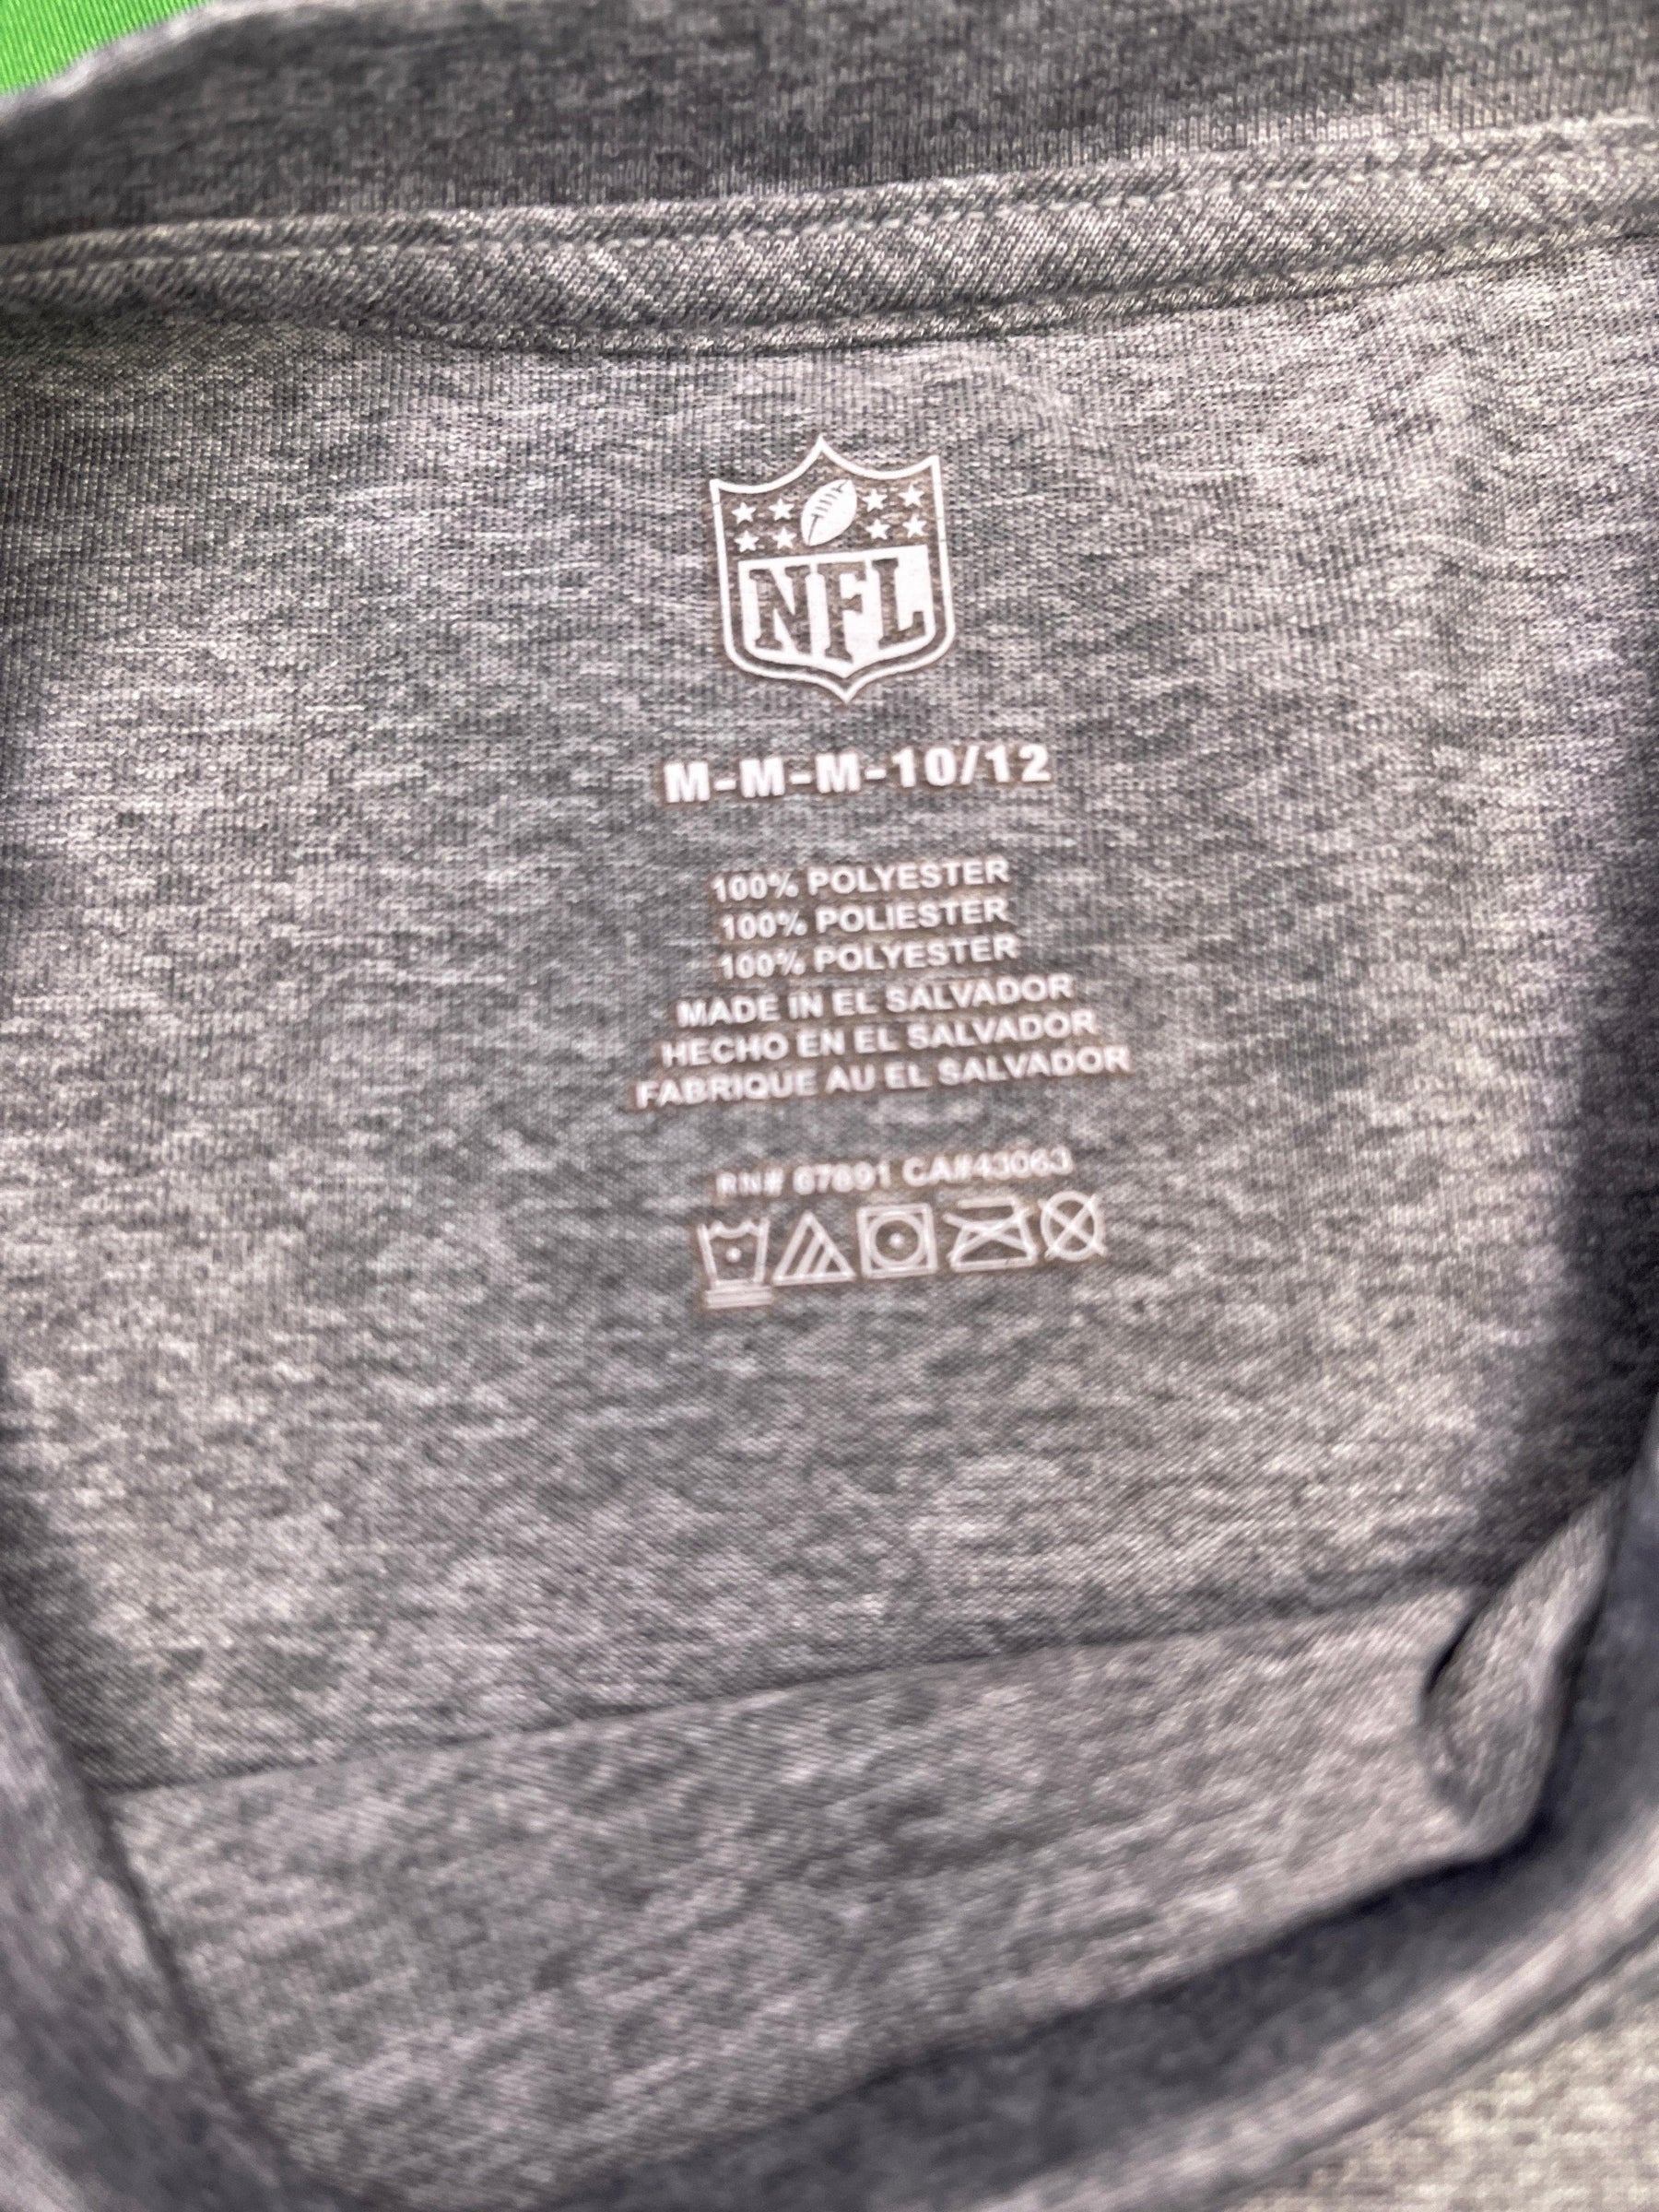 NFL Tennessee Titans Heathered Grey T-Shirt Youth Medium 10-12